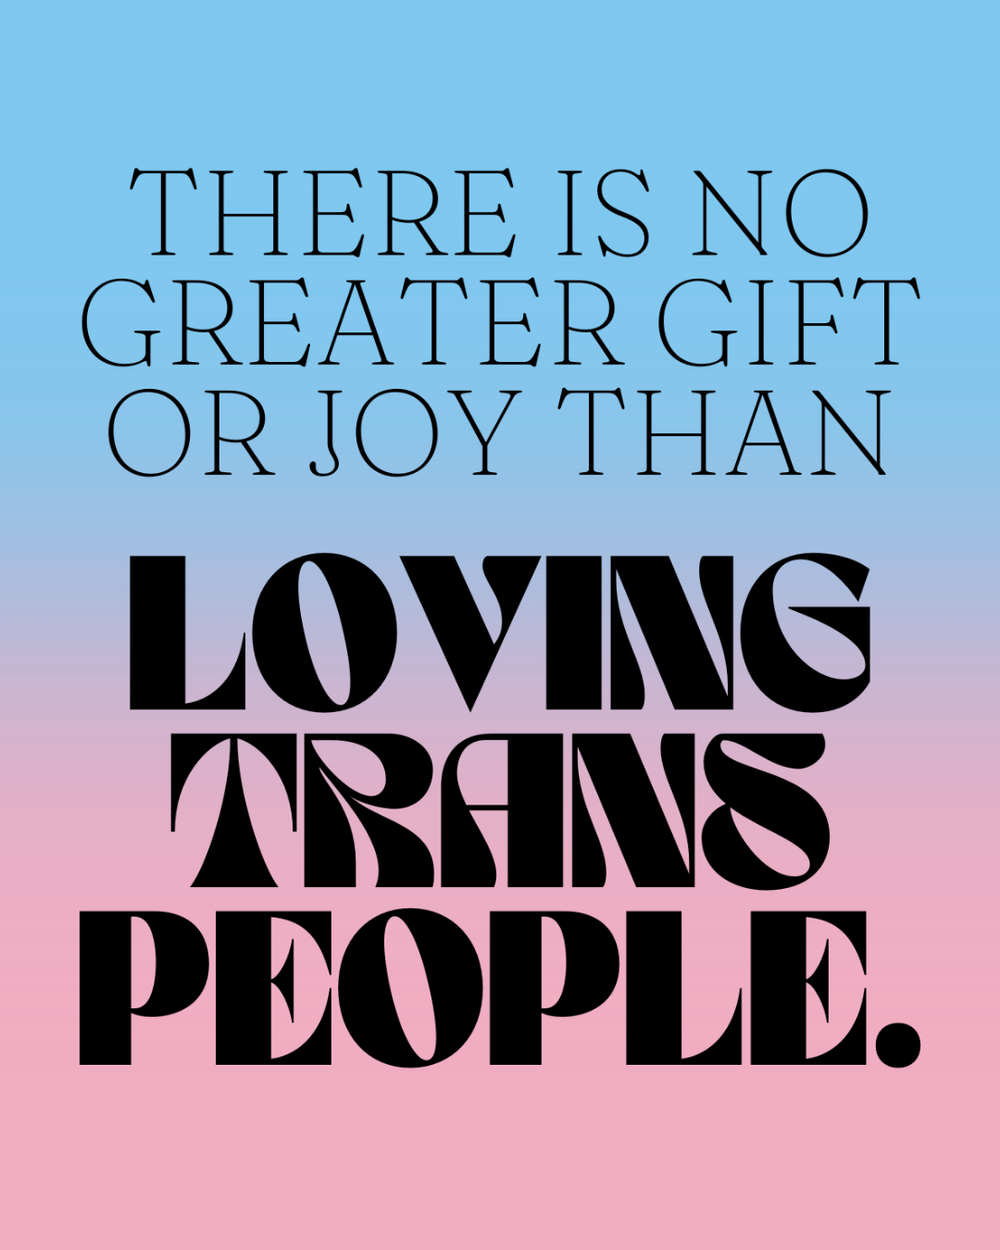  "There is no greater gift or joy than loving trans people." on a blue and pink gradient background. This art is a part of Fancy's submission. 